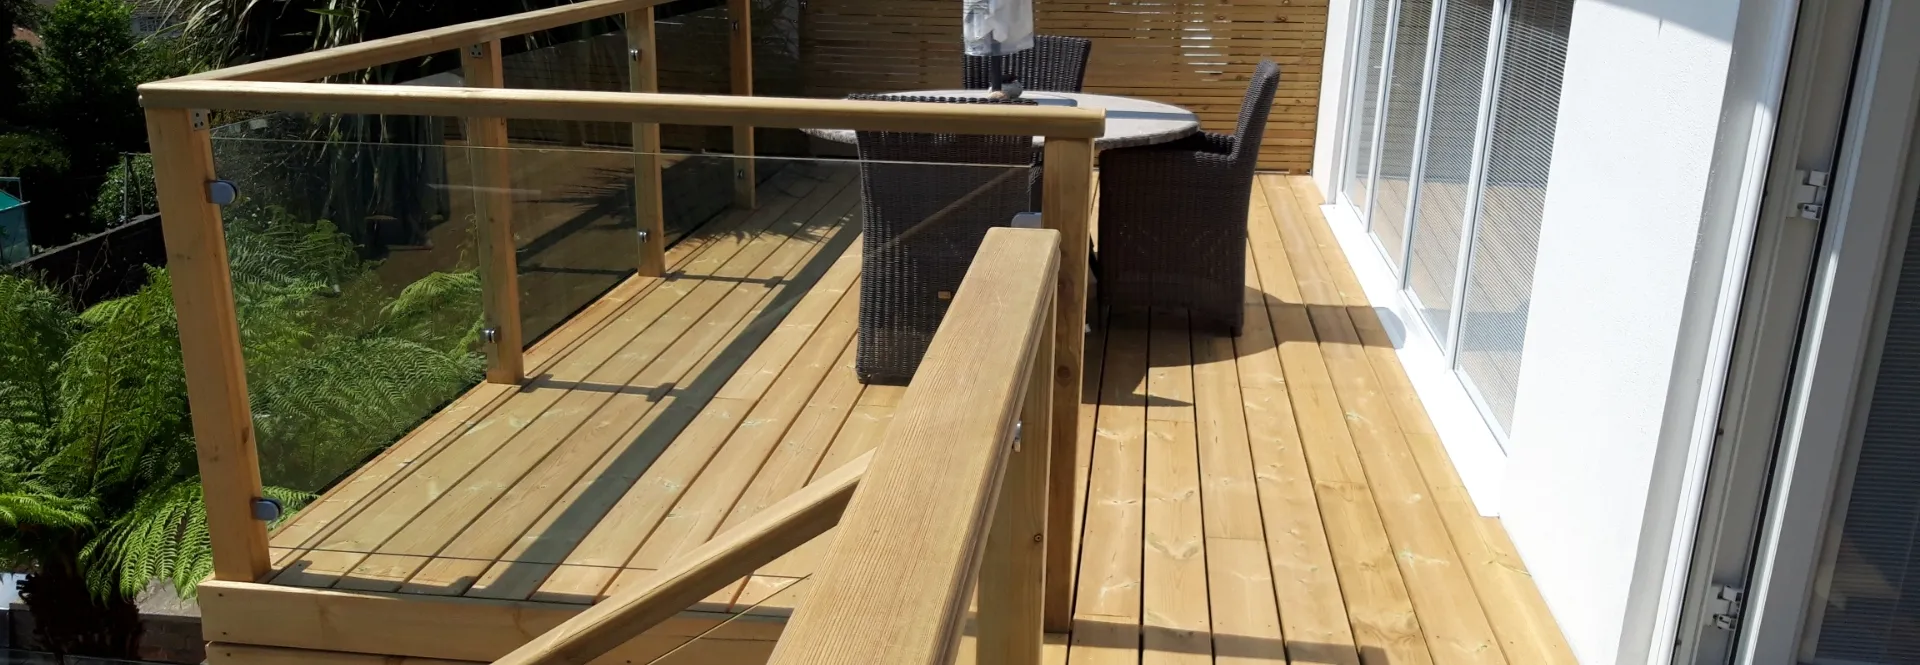 roof-terrace-decking